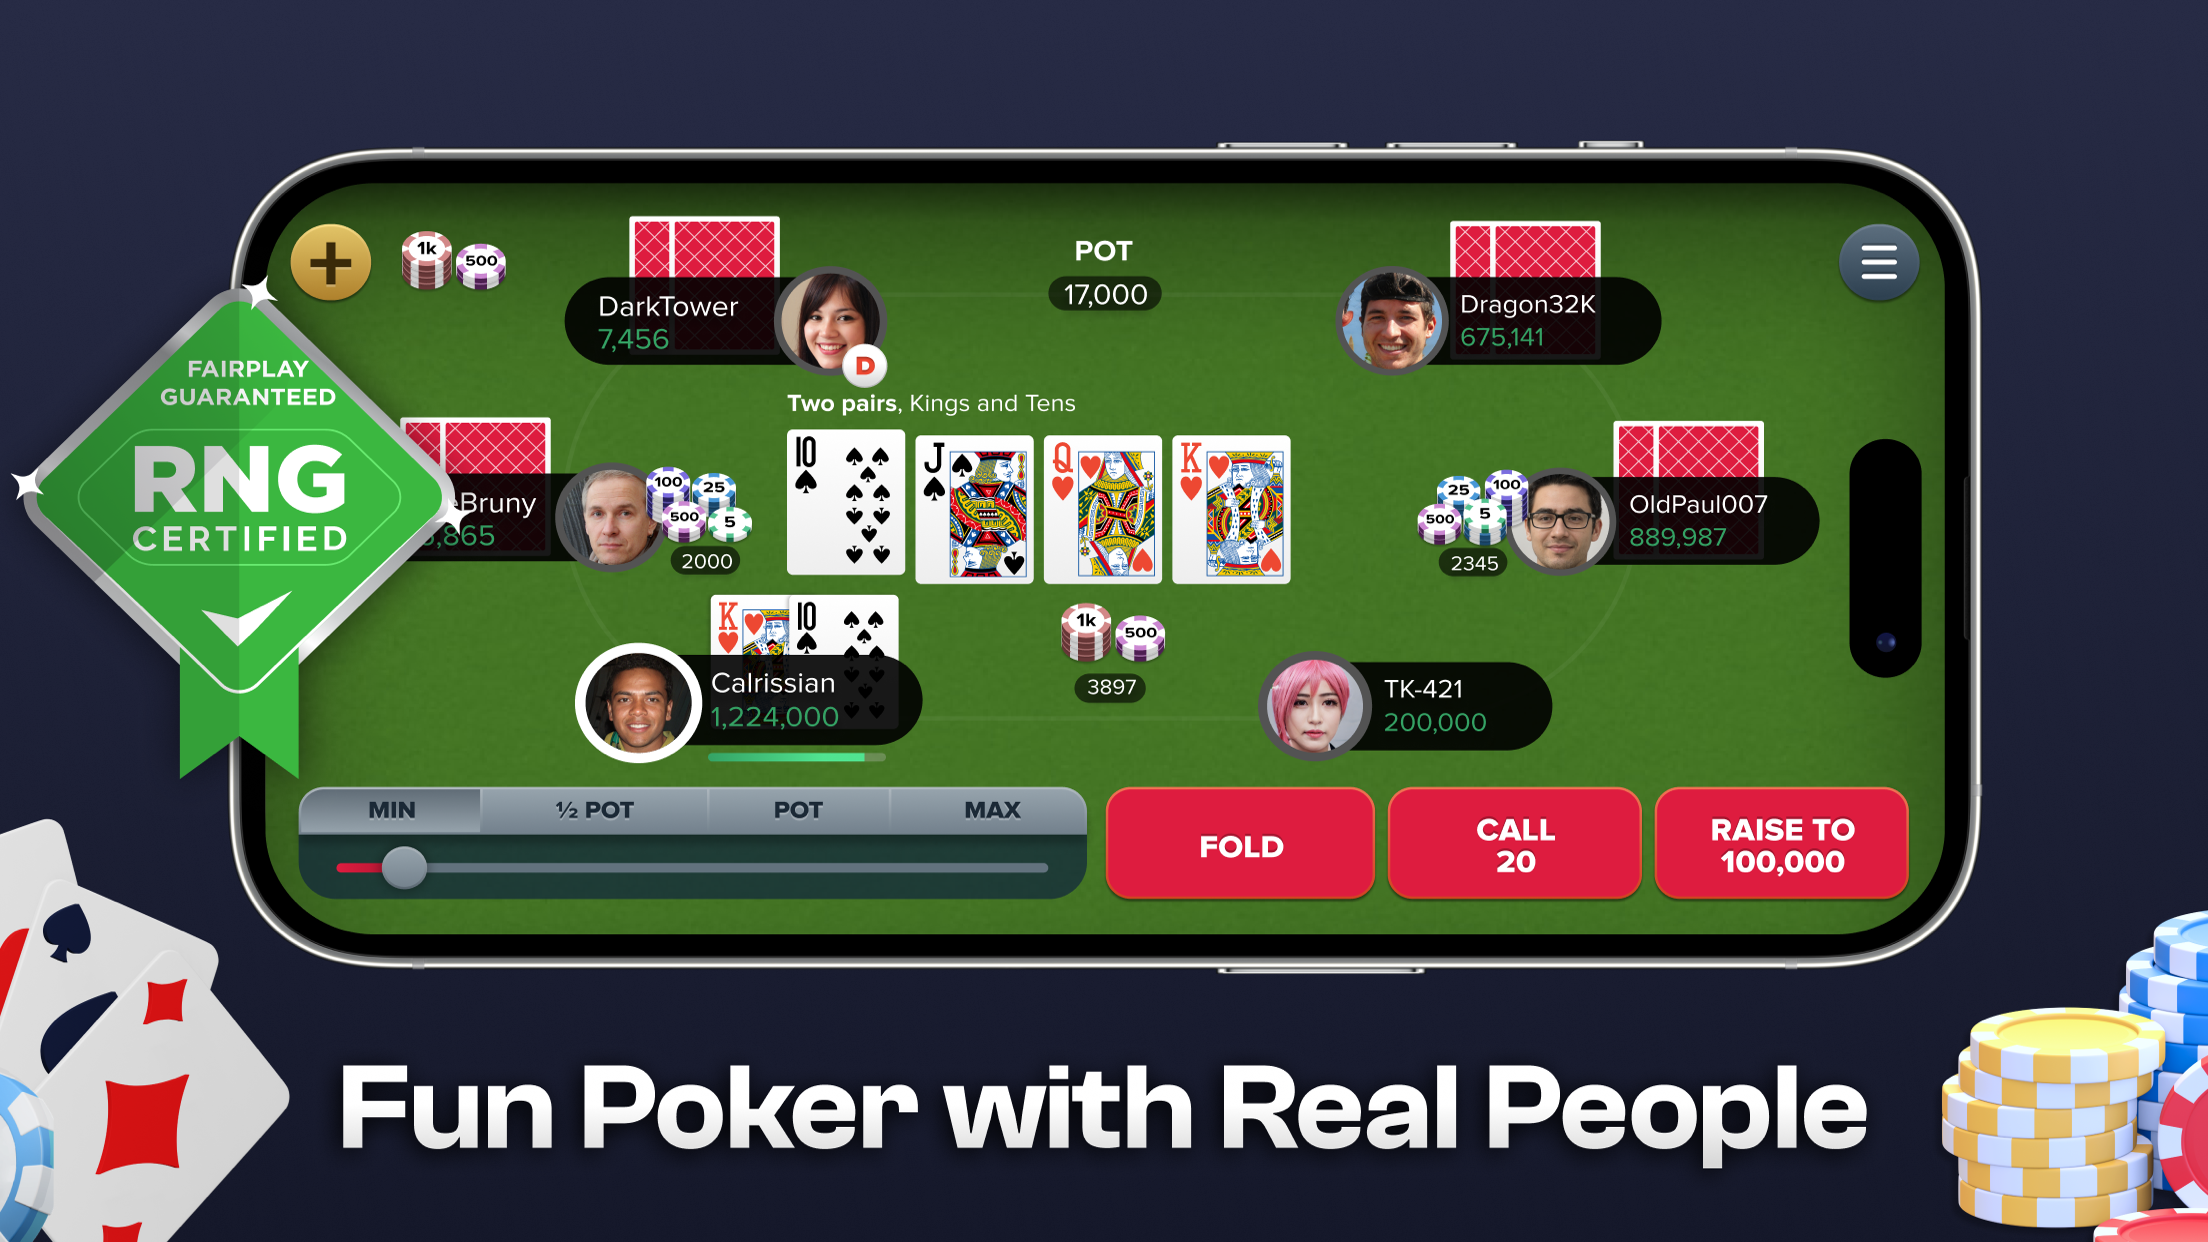 REPLAY POKER REVIEW: Everything You Need To Know